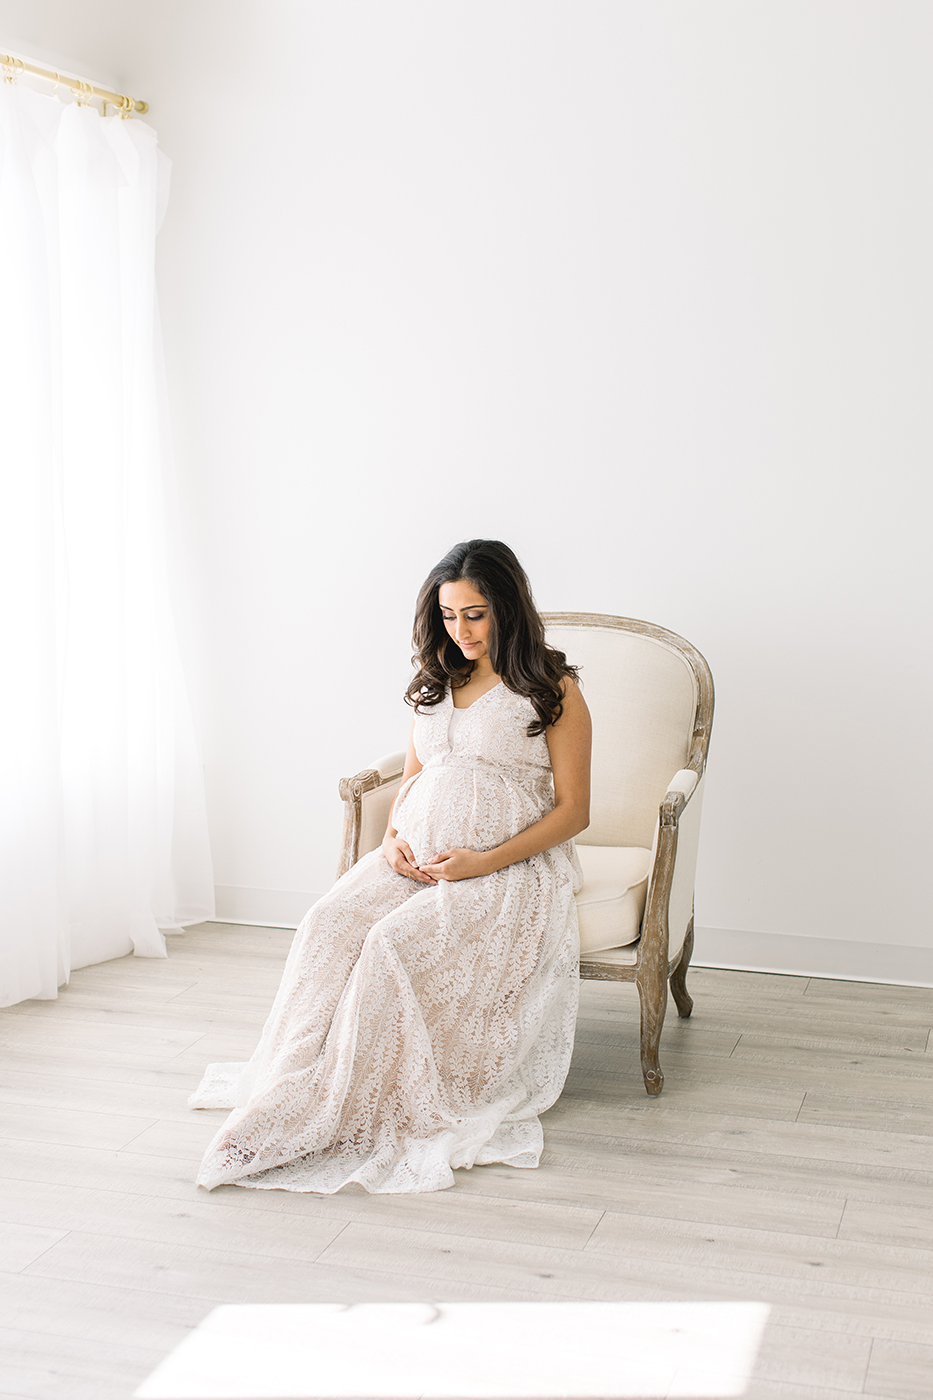 pregnant women in dress sitting in chair maternity pictures